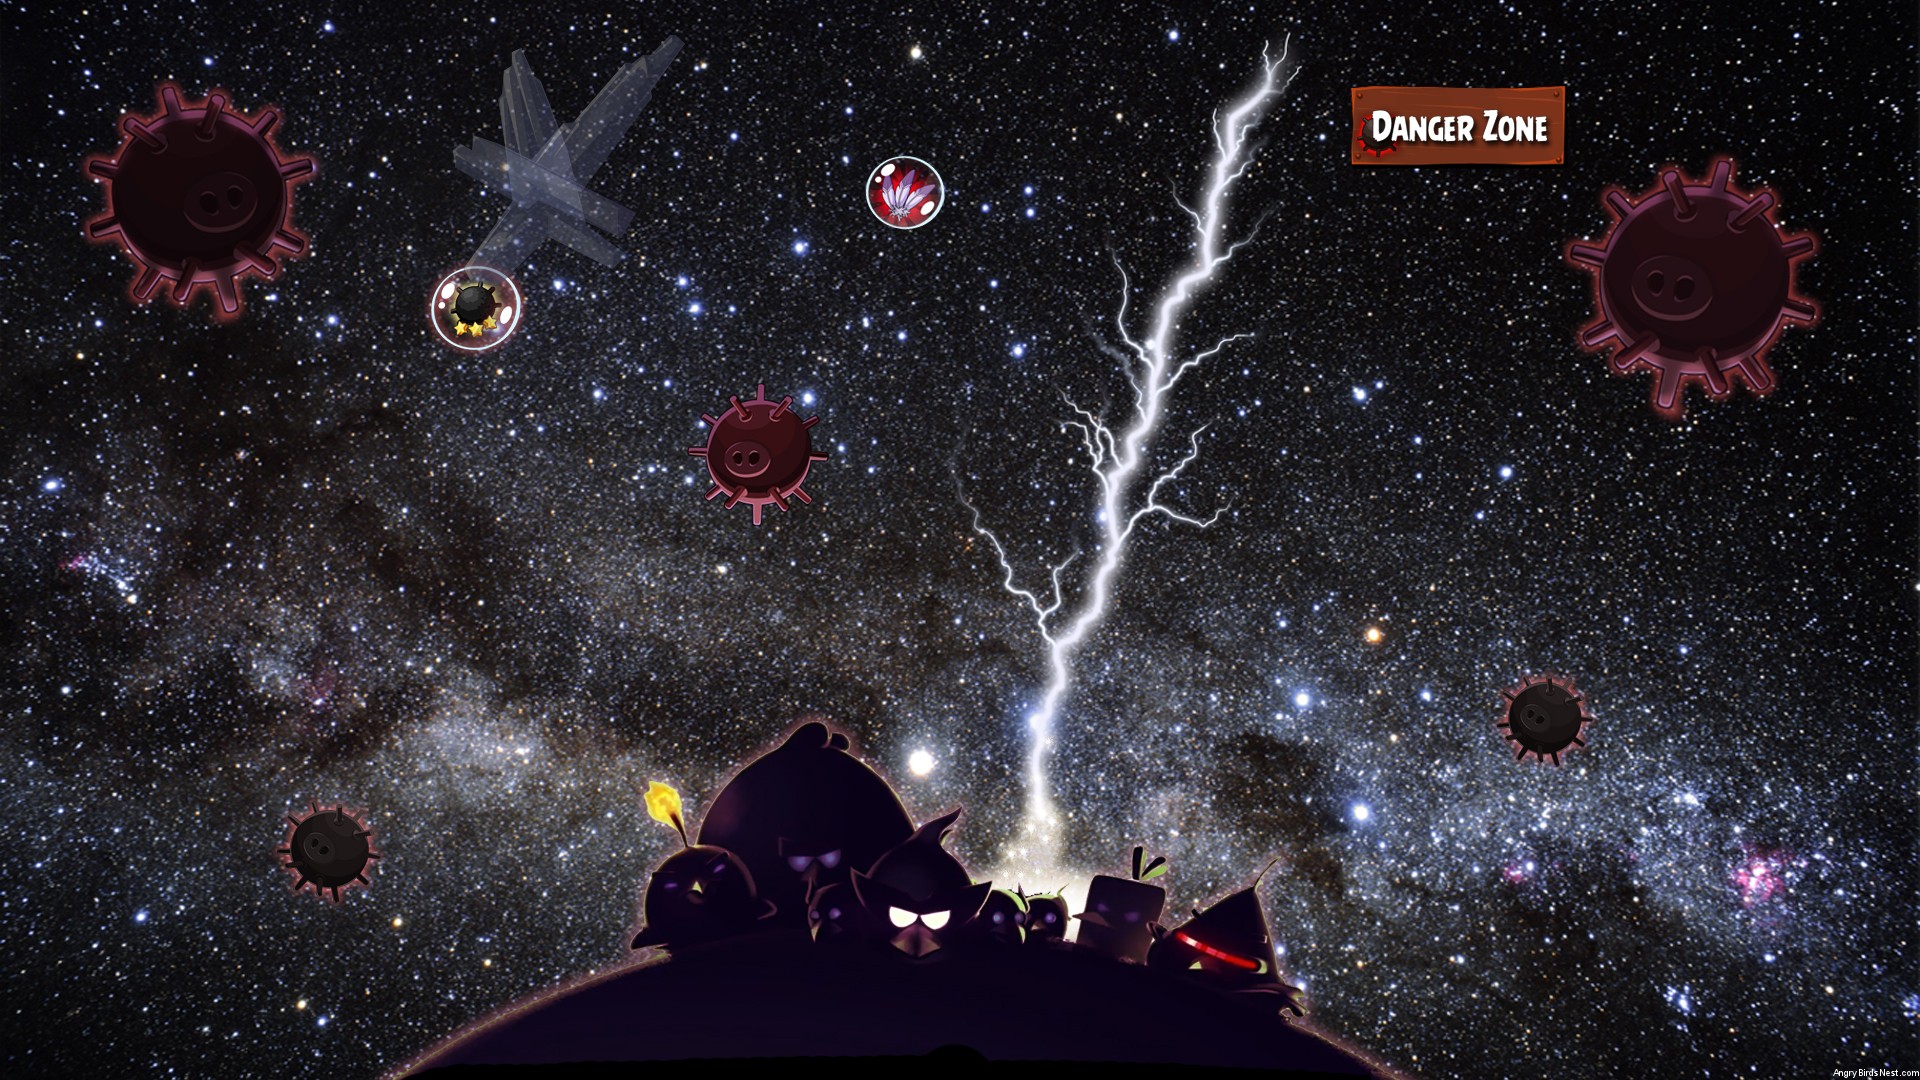 Angry Birds Space Wallpaper Desk x 1080 Sal 3